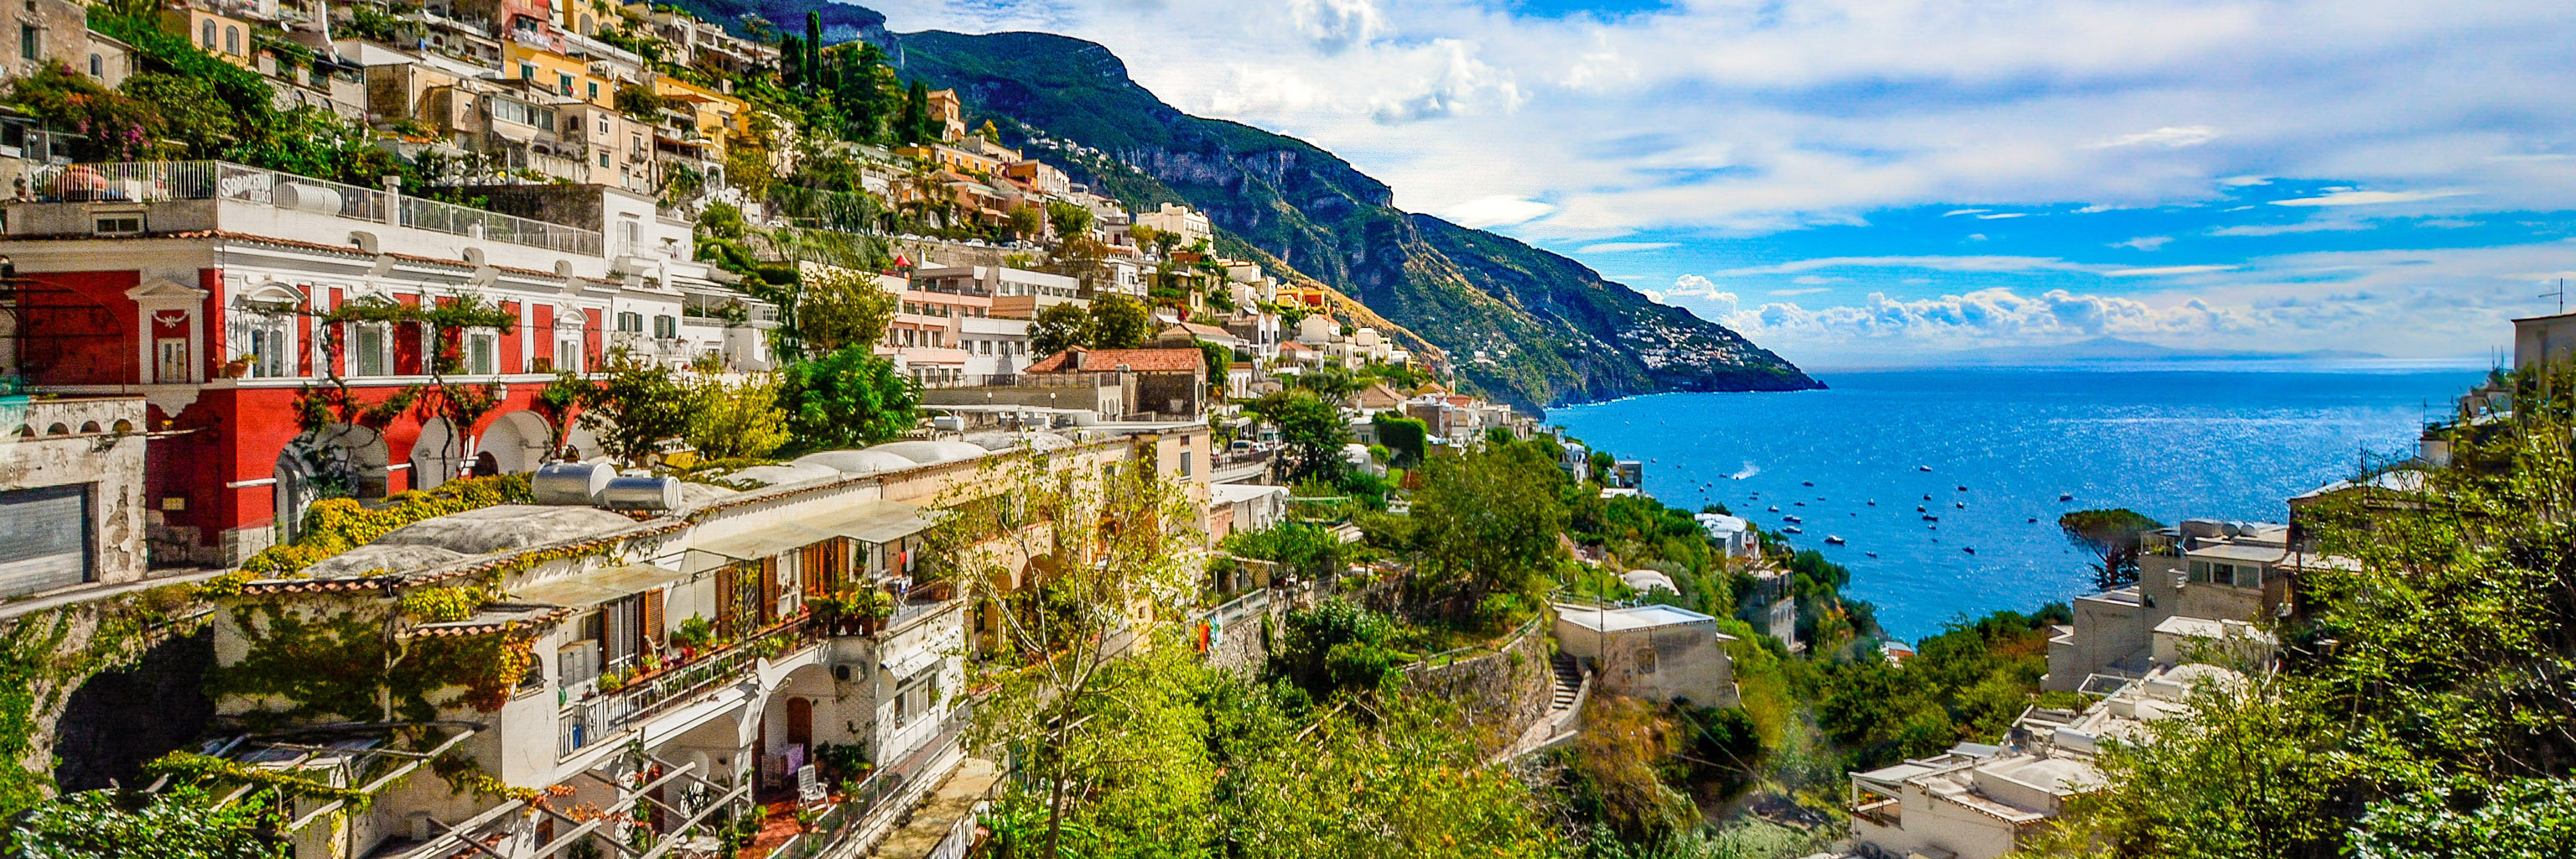 Landscape in the town of Sorrento, Italy